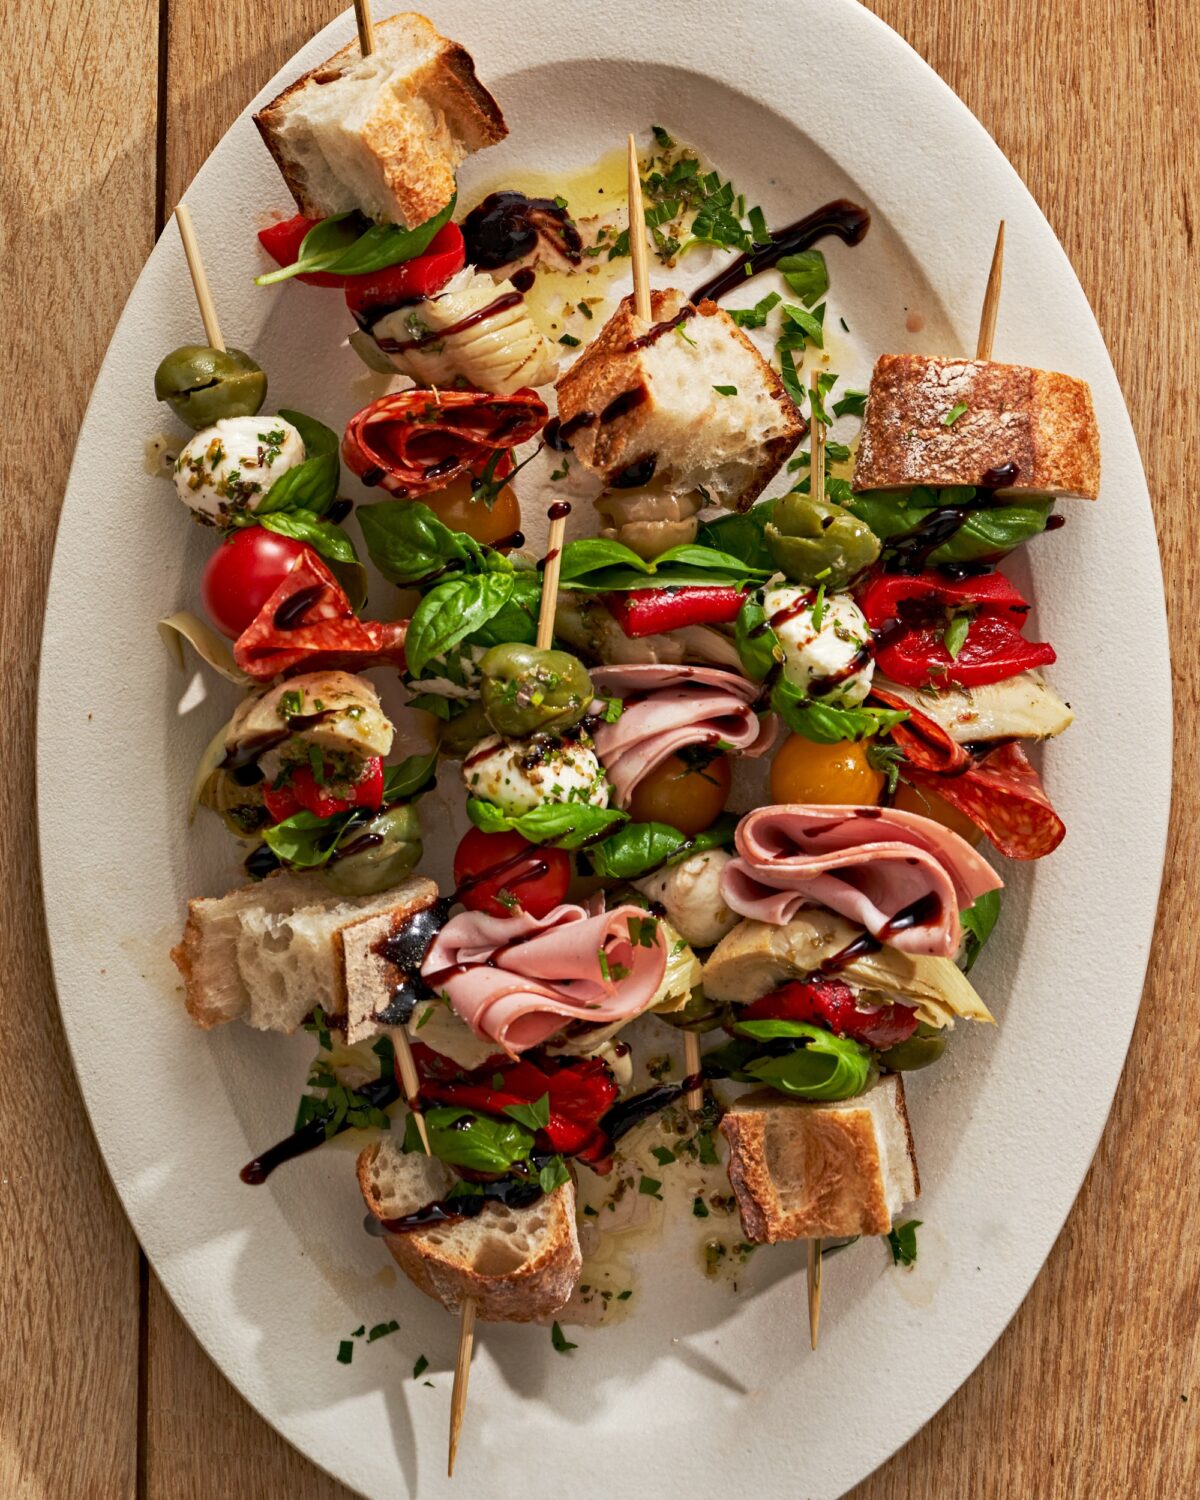 Creamy marinated mozzarella, savory meats, marinated vegetables, plump ripe tomatoes, and fresh herbs come together for the perfect appetizer. (Andrew Bui/TNS)